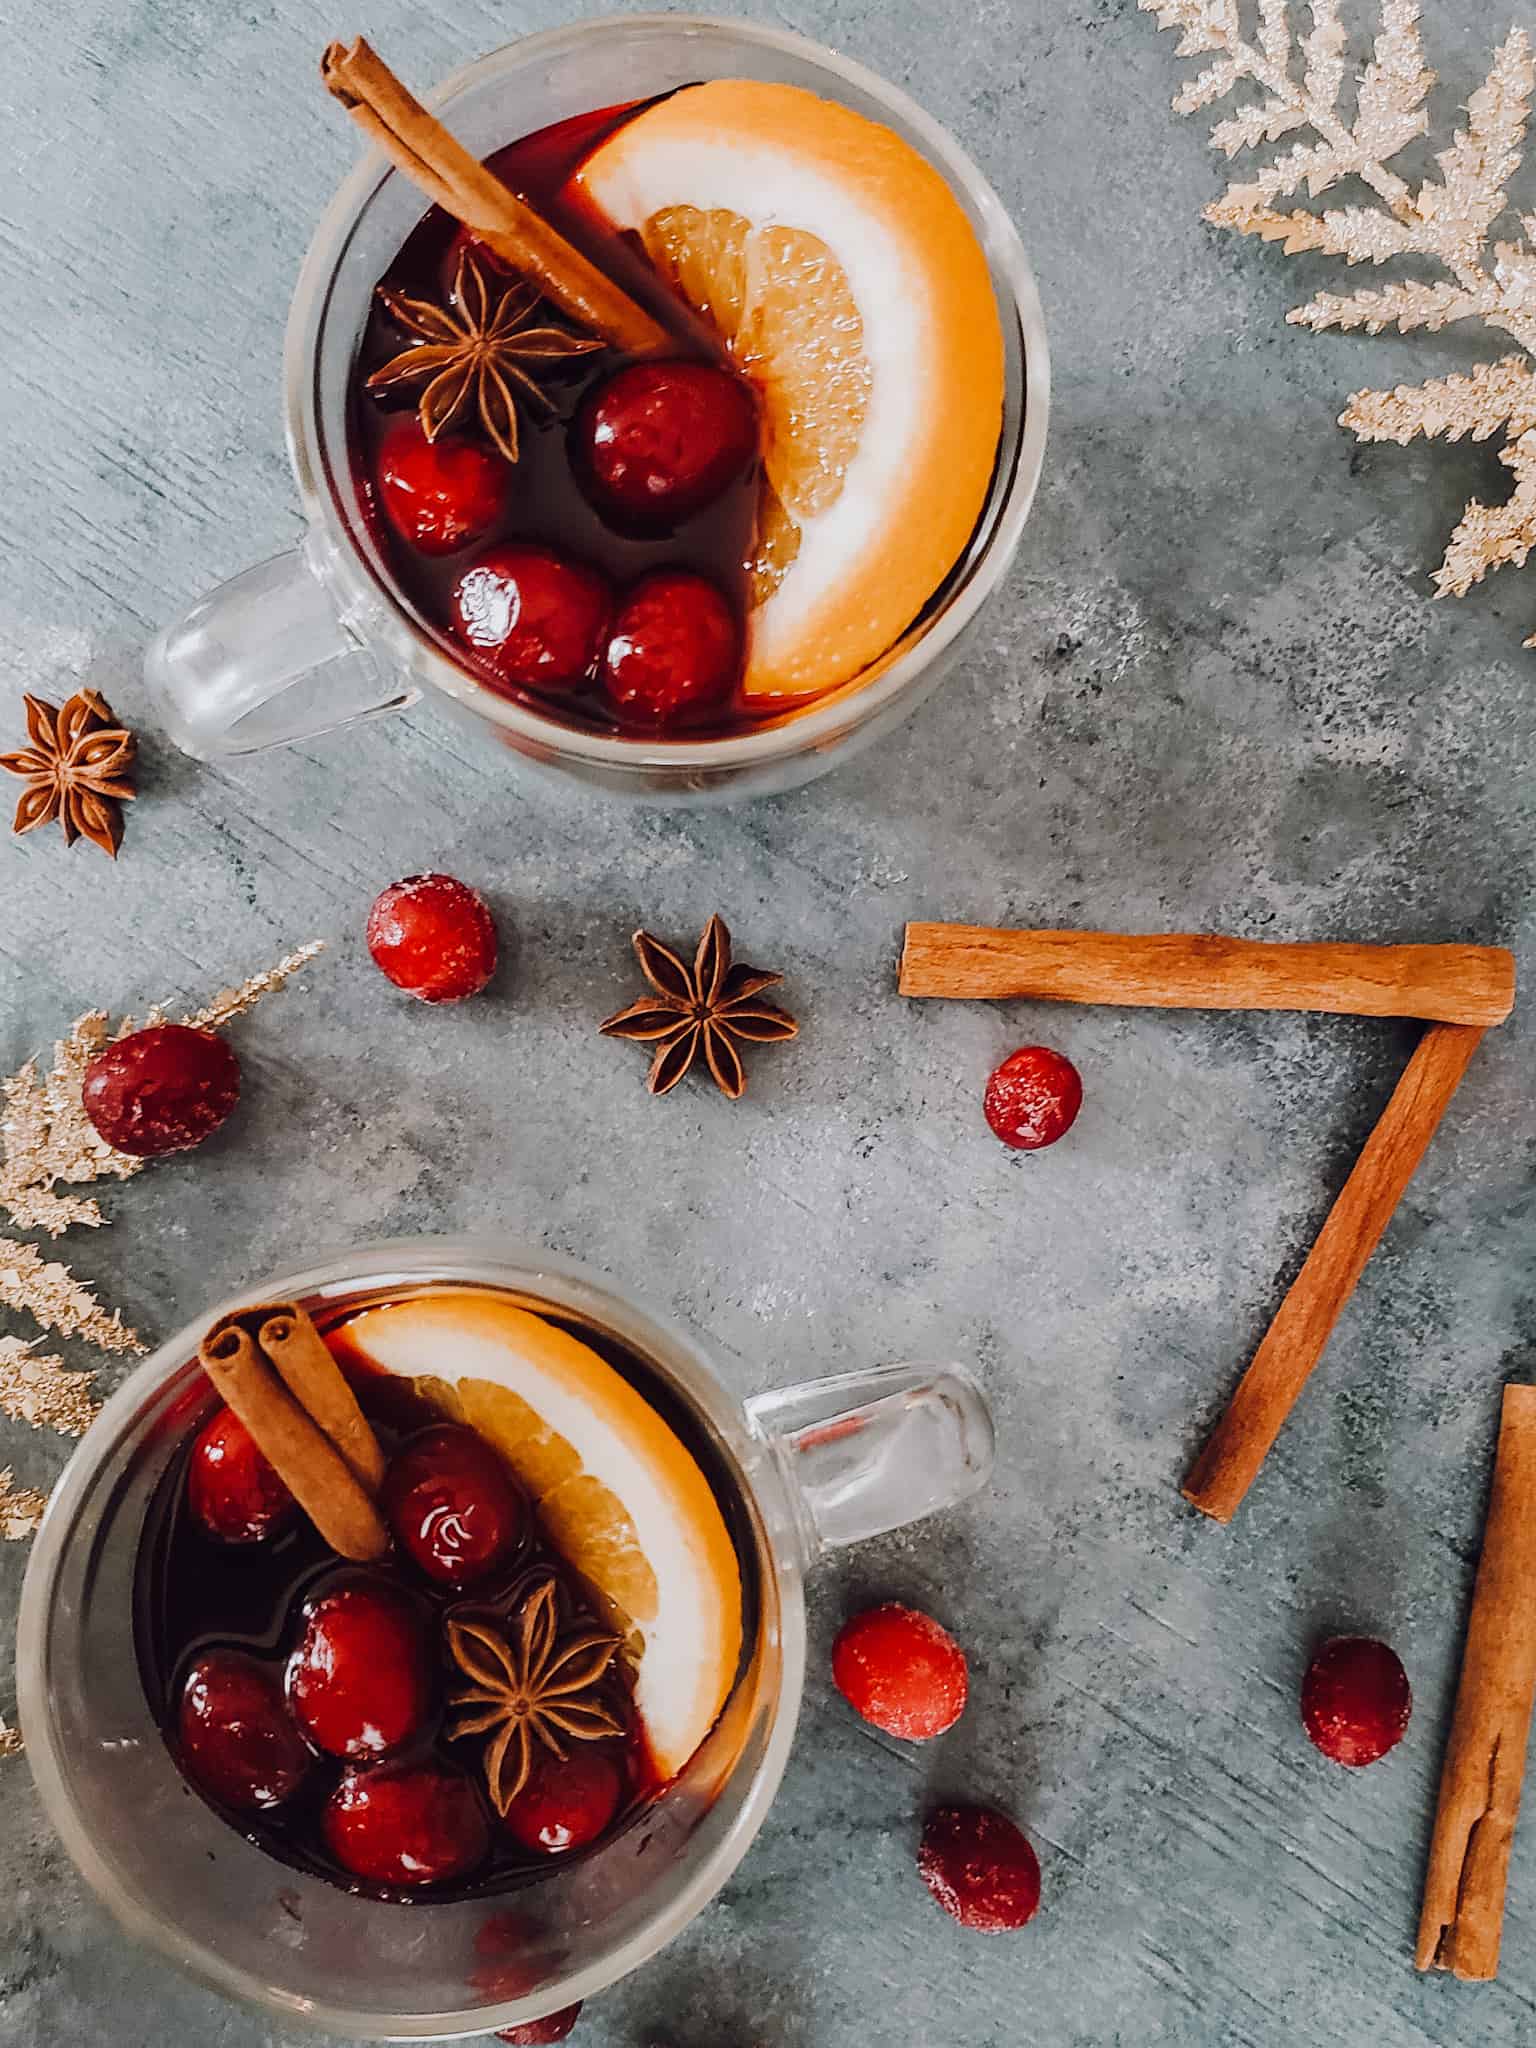 Two clear glasses of mulled red wine with cranberries and a slice of orange